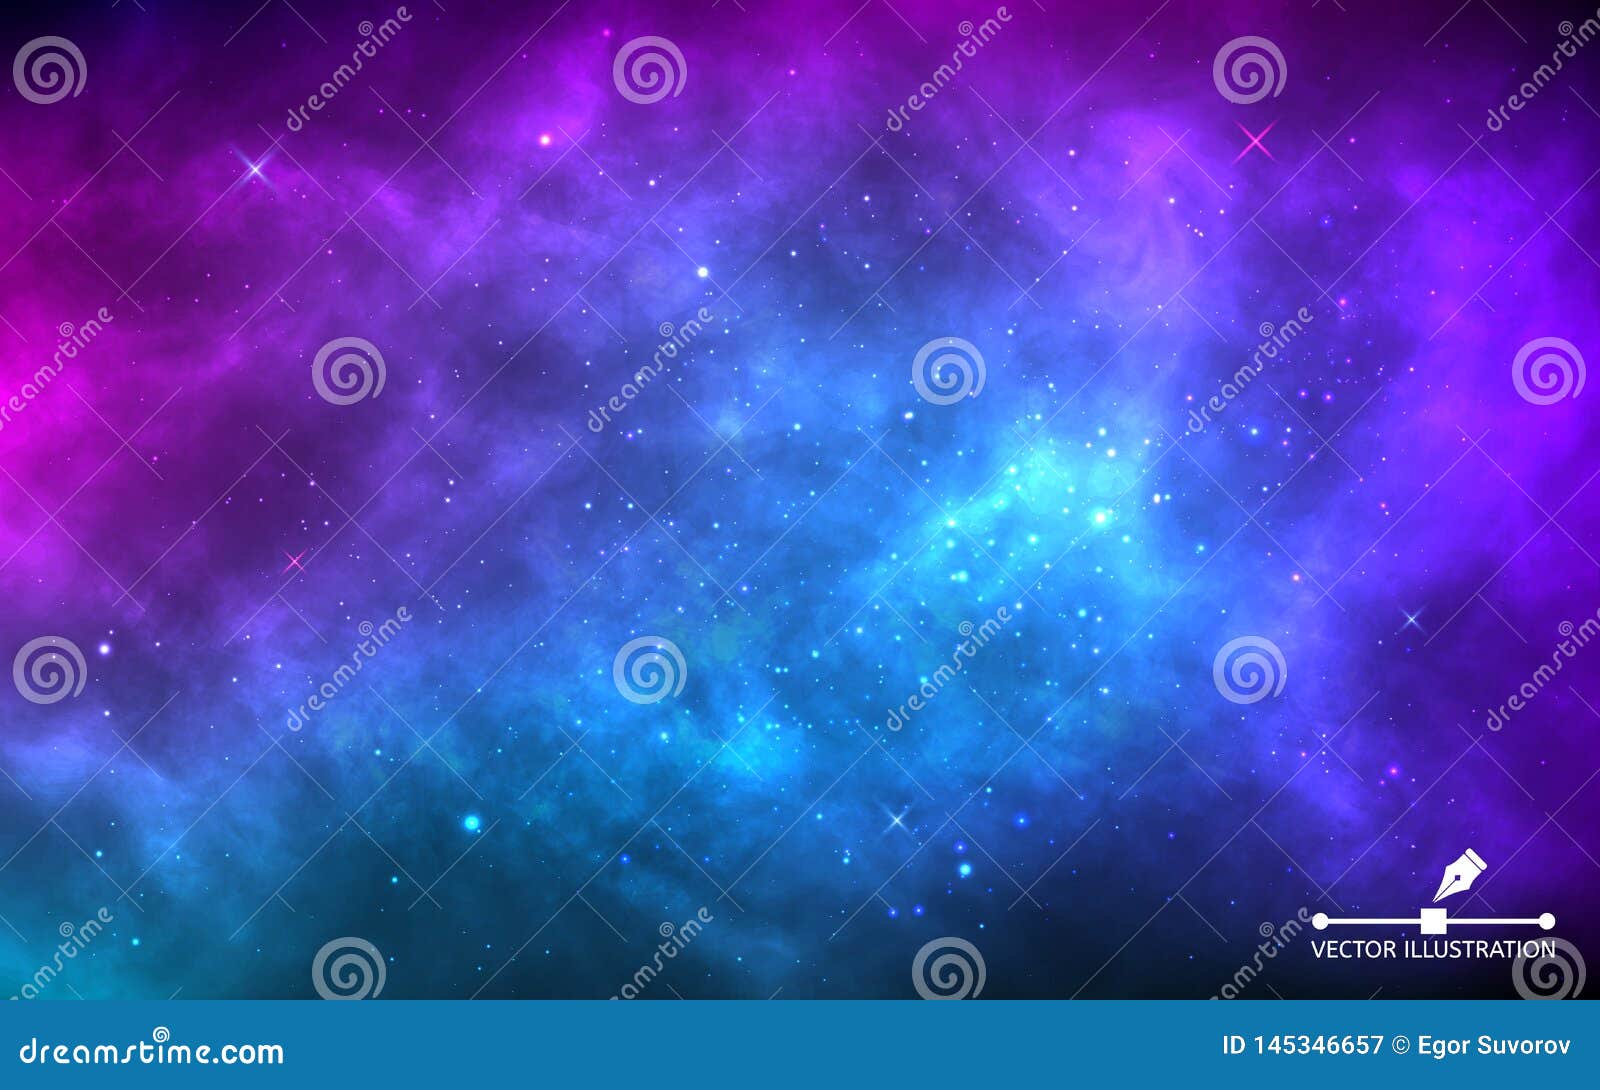 space background with stardust and shining stars. realistic colorful cosmos with nebula and milky way. blue galaxy